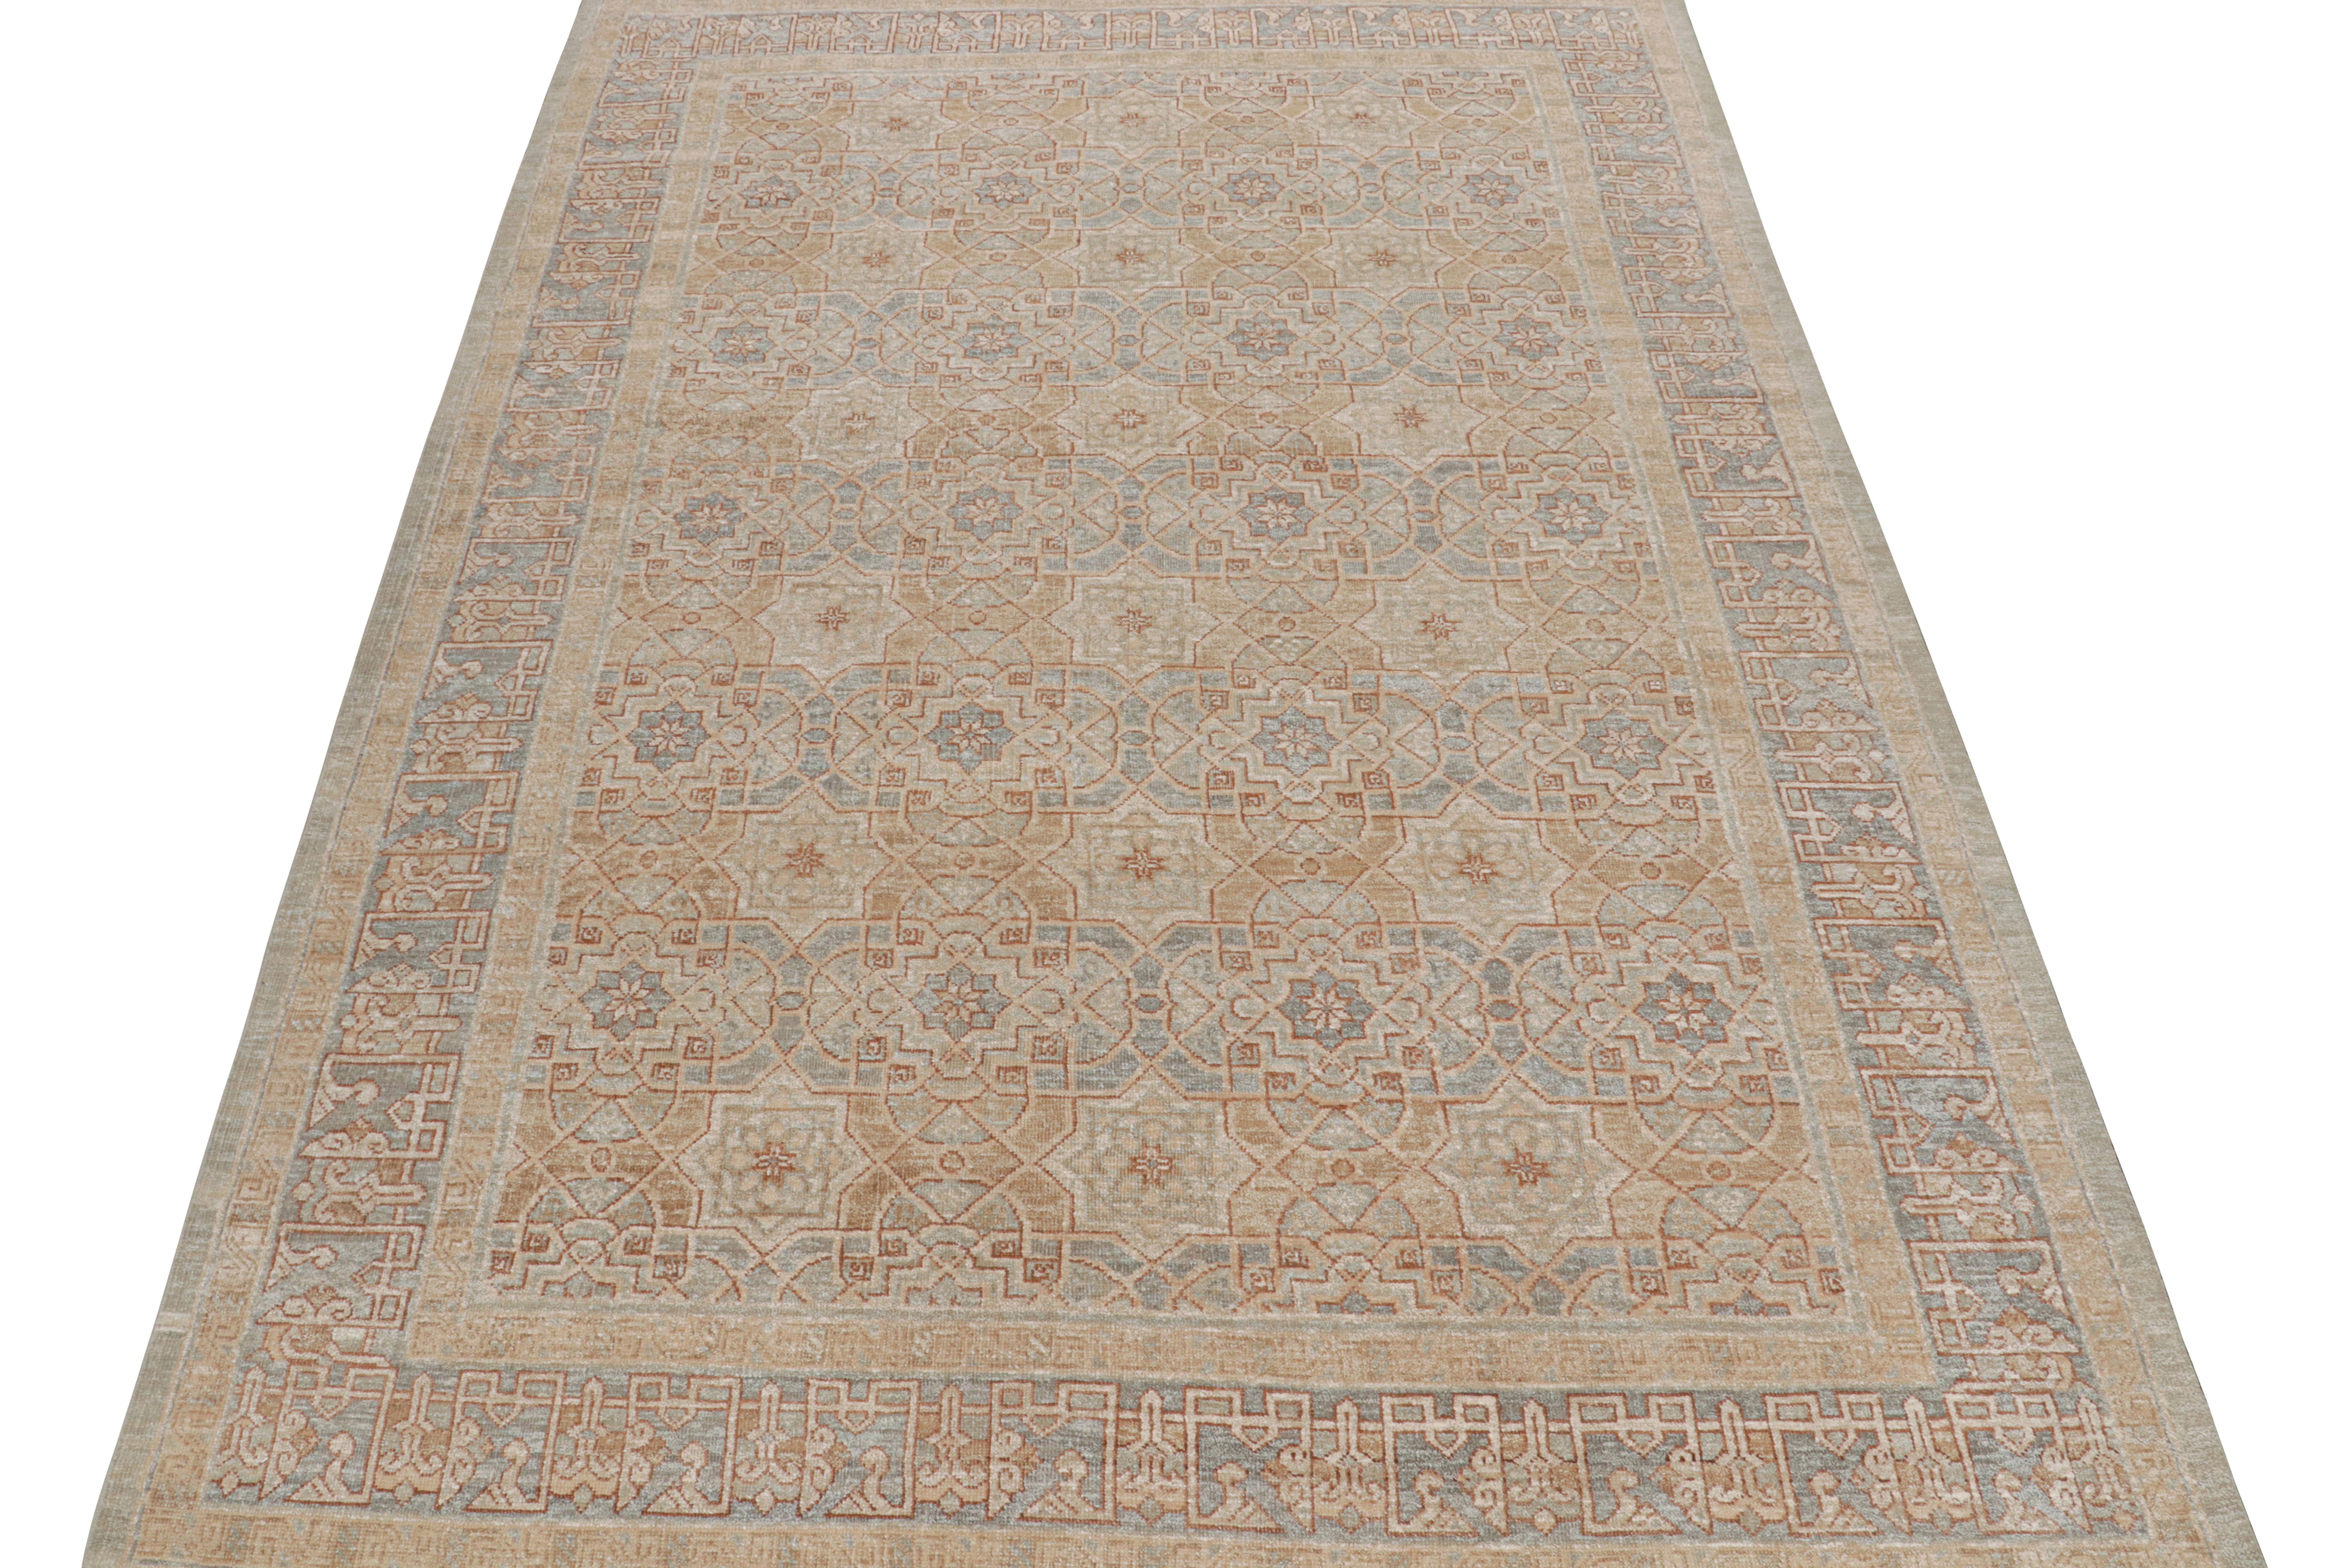 Indian Rug & Kilim’s Oushak Style Rug in Beige-Brown & Blue Geometric Patterns For Sale